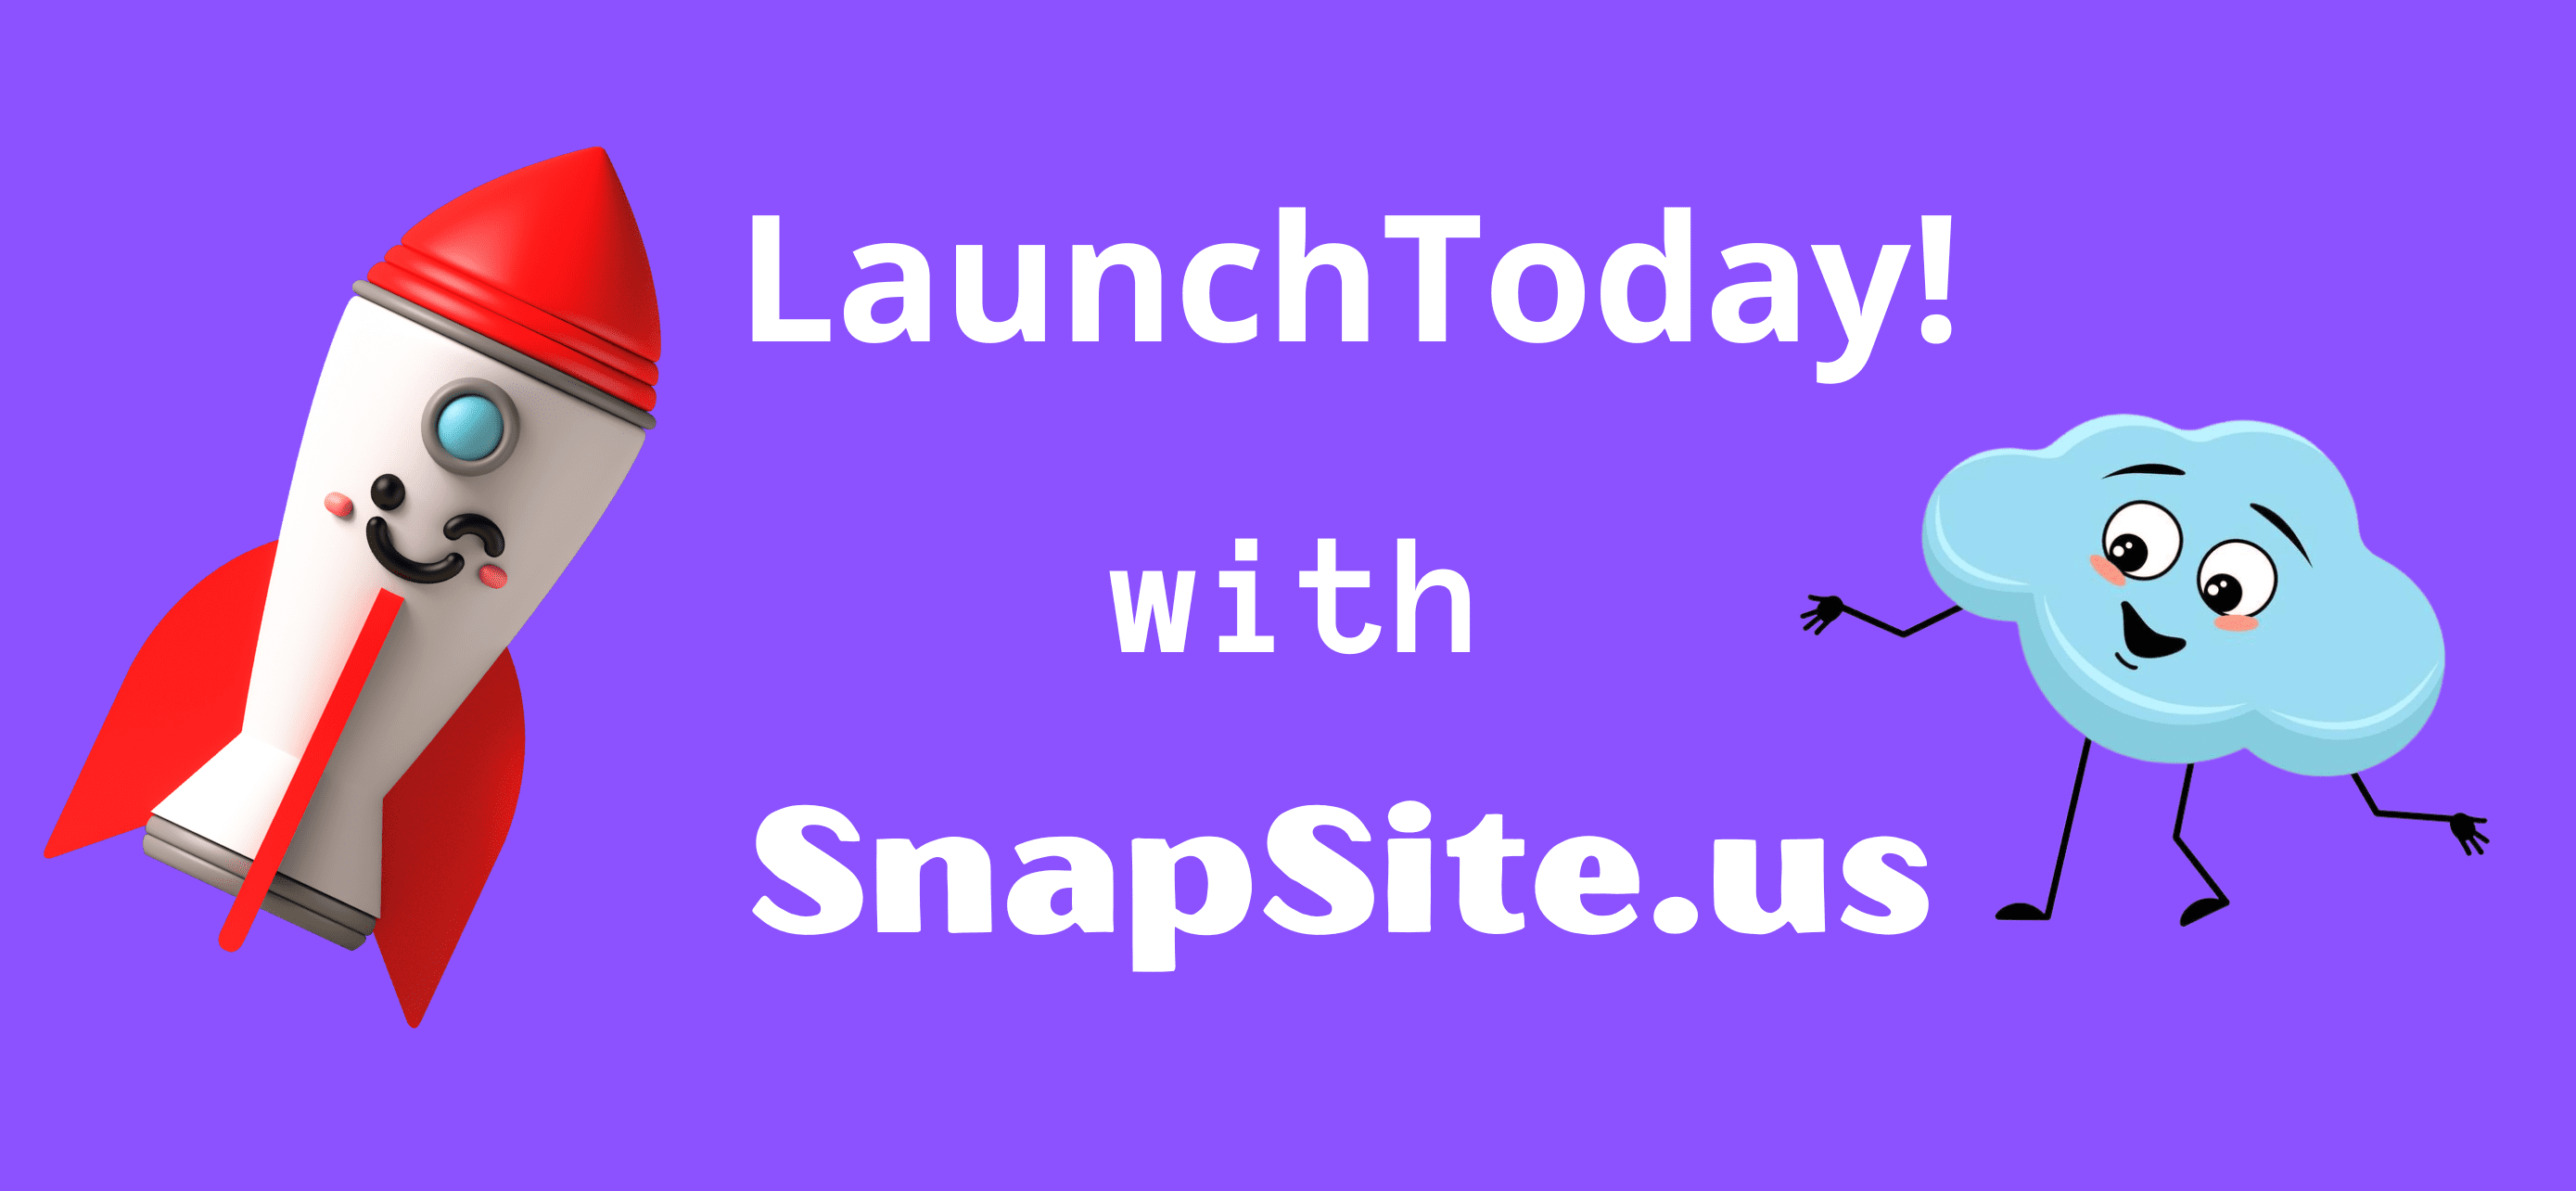 SnapSite.us Launch Today!